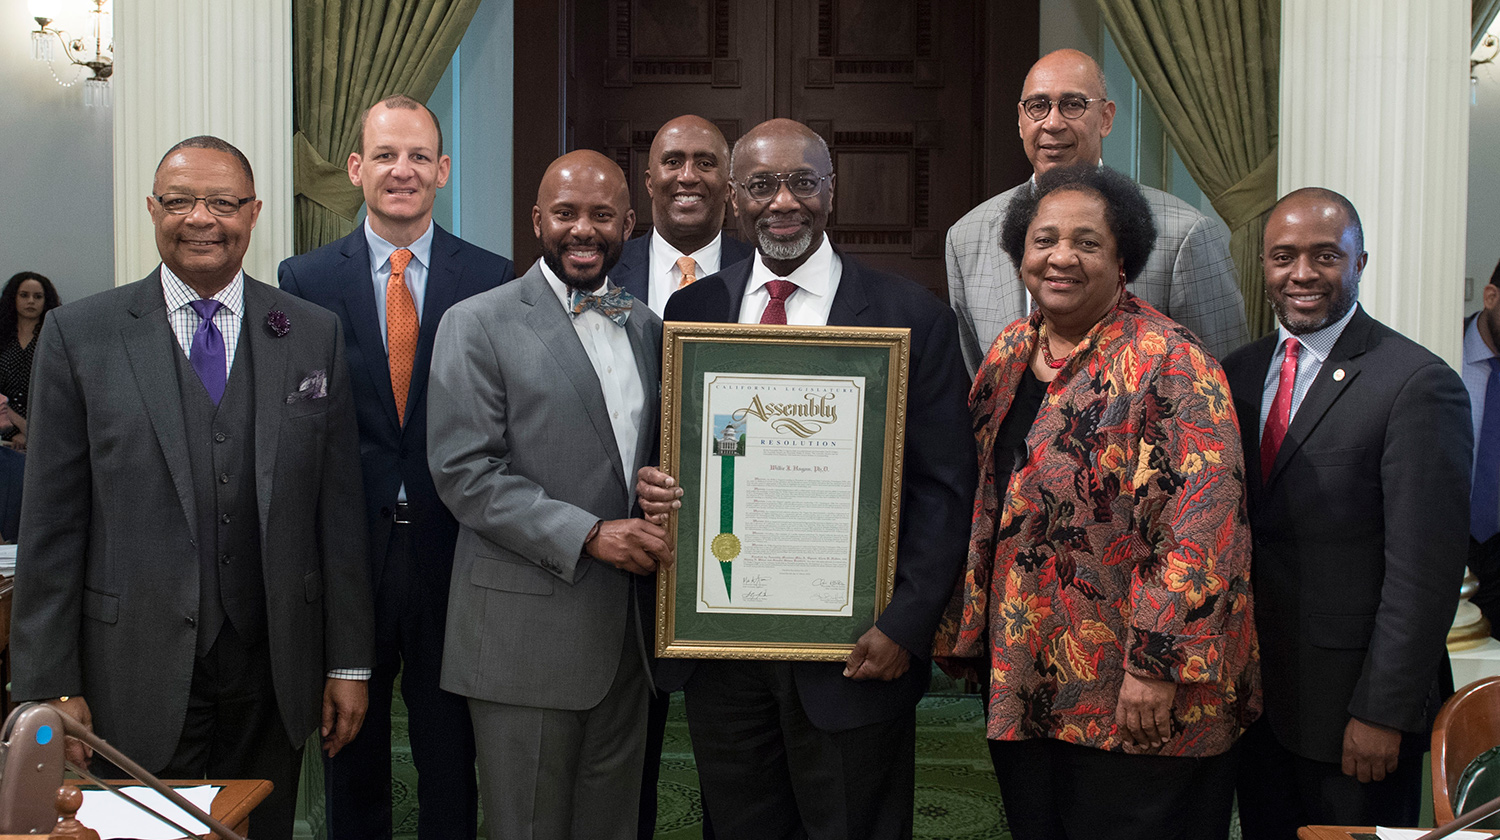 CSUDH President Willie J. Hagan poses with members of the California Legislative Black Caucus. Left to Right: California Assembly Members Reginald Jones-Sawyer; Kevin McCarty; Mike Gipson; Jim Cooper; Willie J. Hagan; Chris Holden; Shirley Weber; and Tony Thurmond.